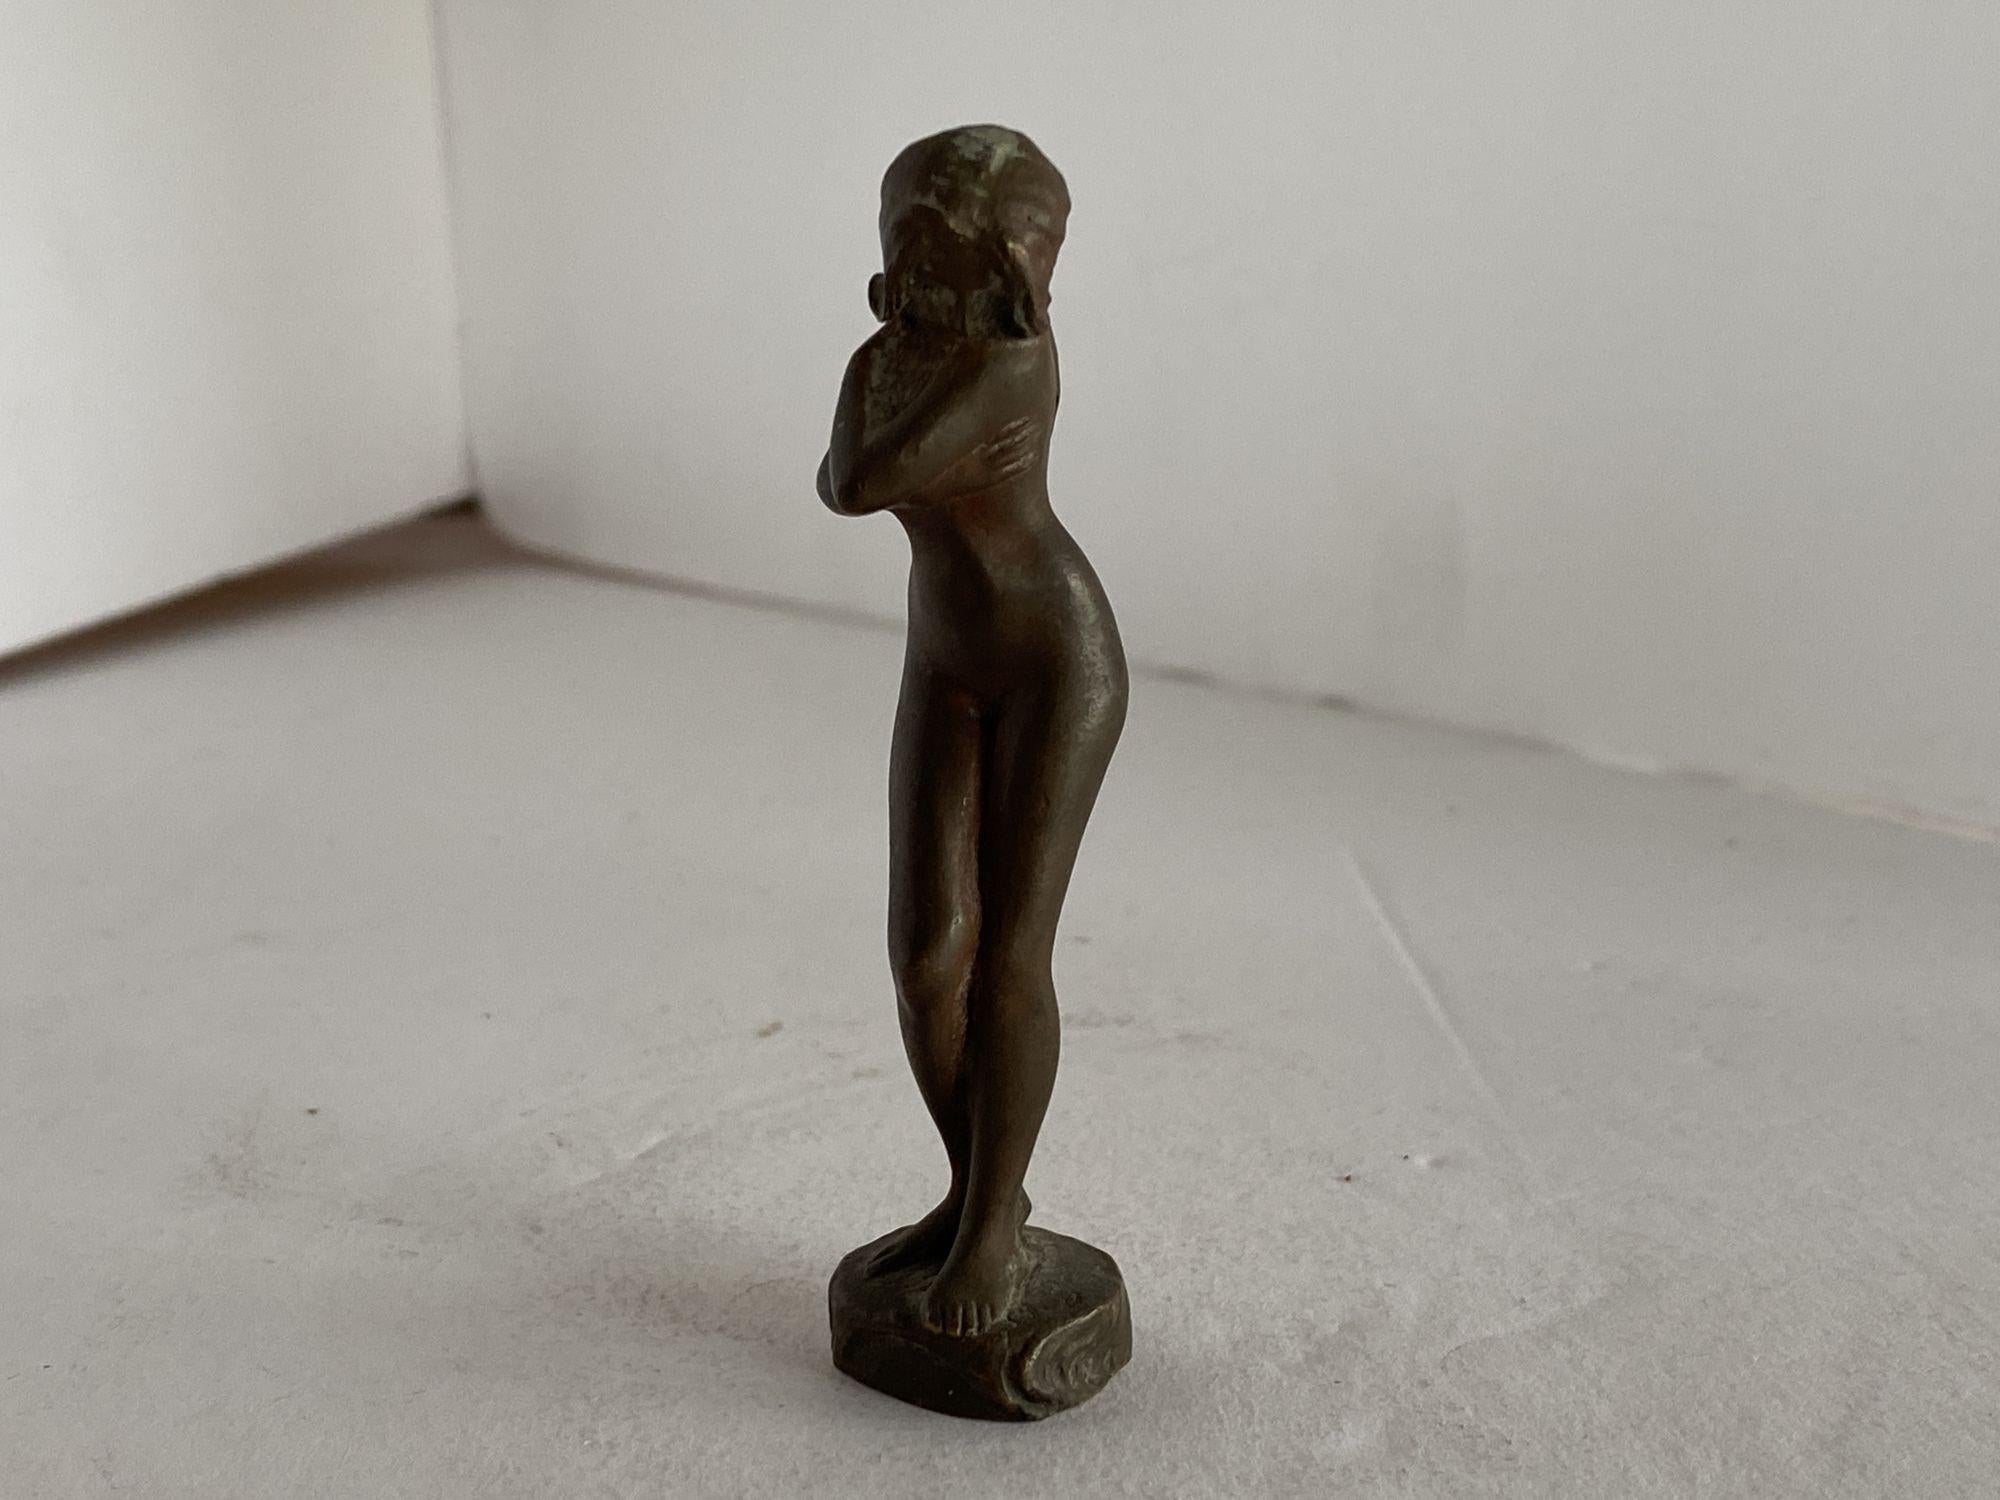 Late Victorian Bronze Shy Nude Women Art Nouveau Letter Wax Seal Stamp unused and never monogrammed.
 
Circa 1890.